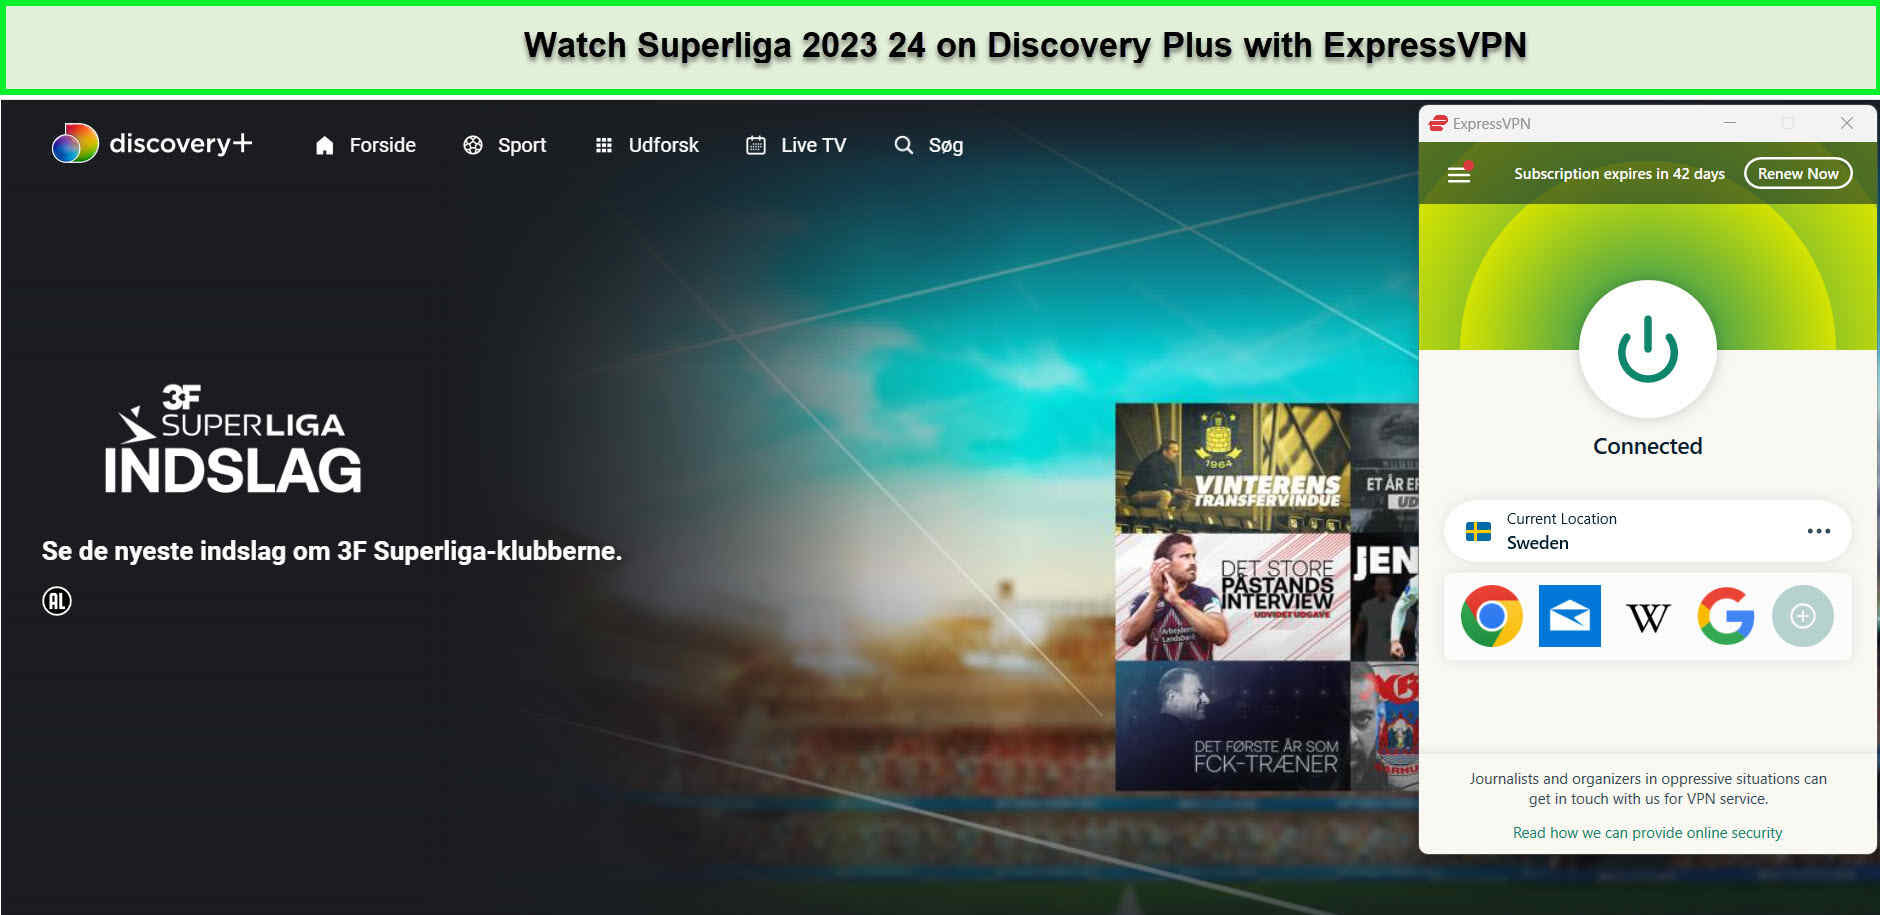 Watch-Superliga-2023-24-in-UAE-on-Discovery-Plus-with-ExpressVPN!